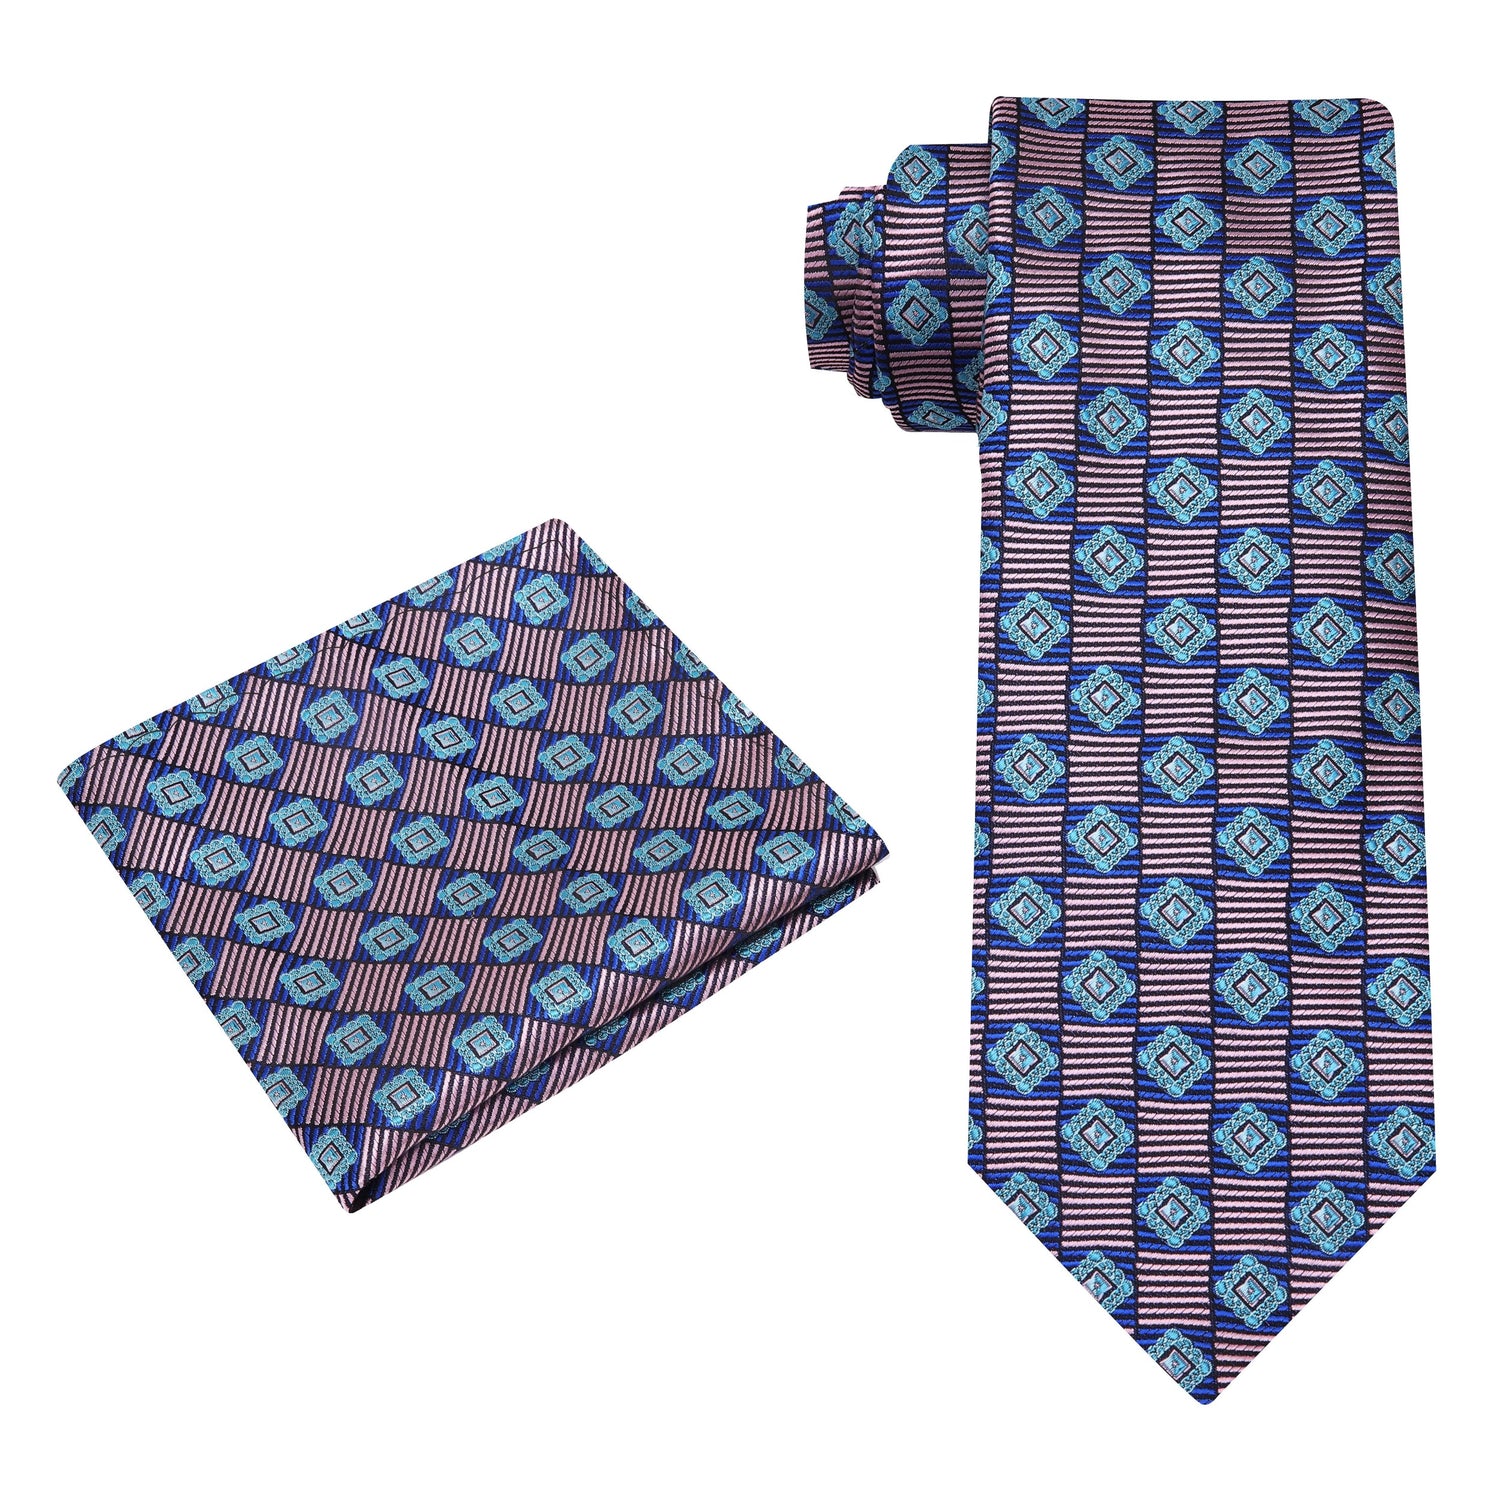 Alternate View:A Blue, Turquoise Geometric Pattern Silk Necktie, Matching Pocket Square